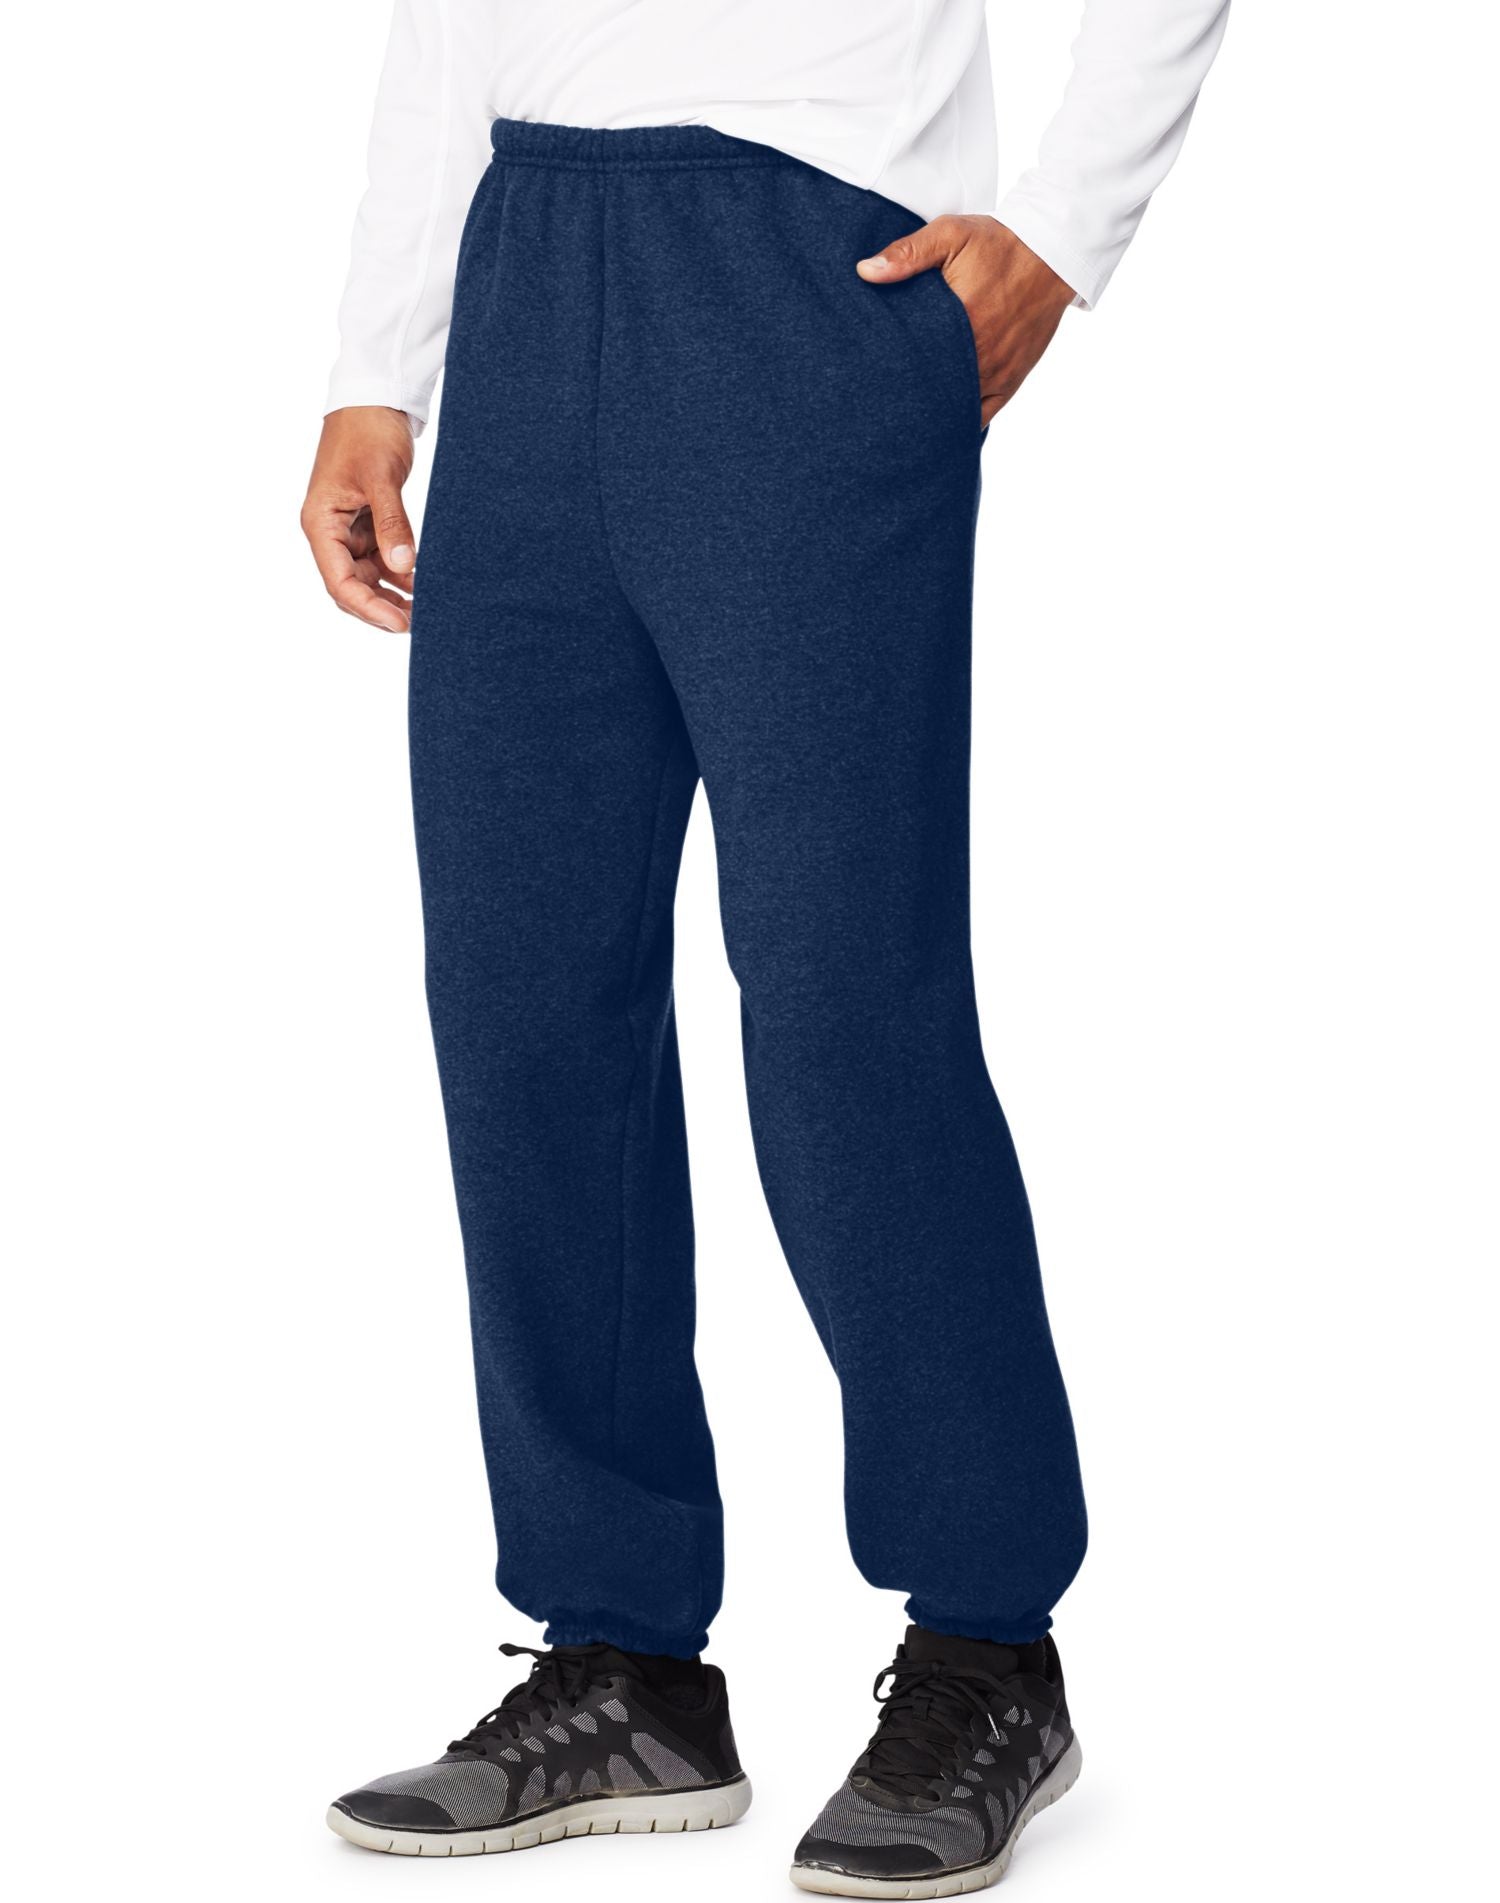 OF360 - Hanes Mens Sport Ultimate Cotton Fleece Sweatpants With Pockets